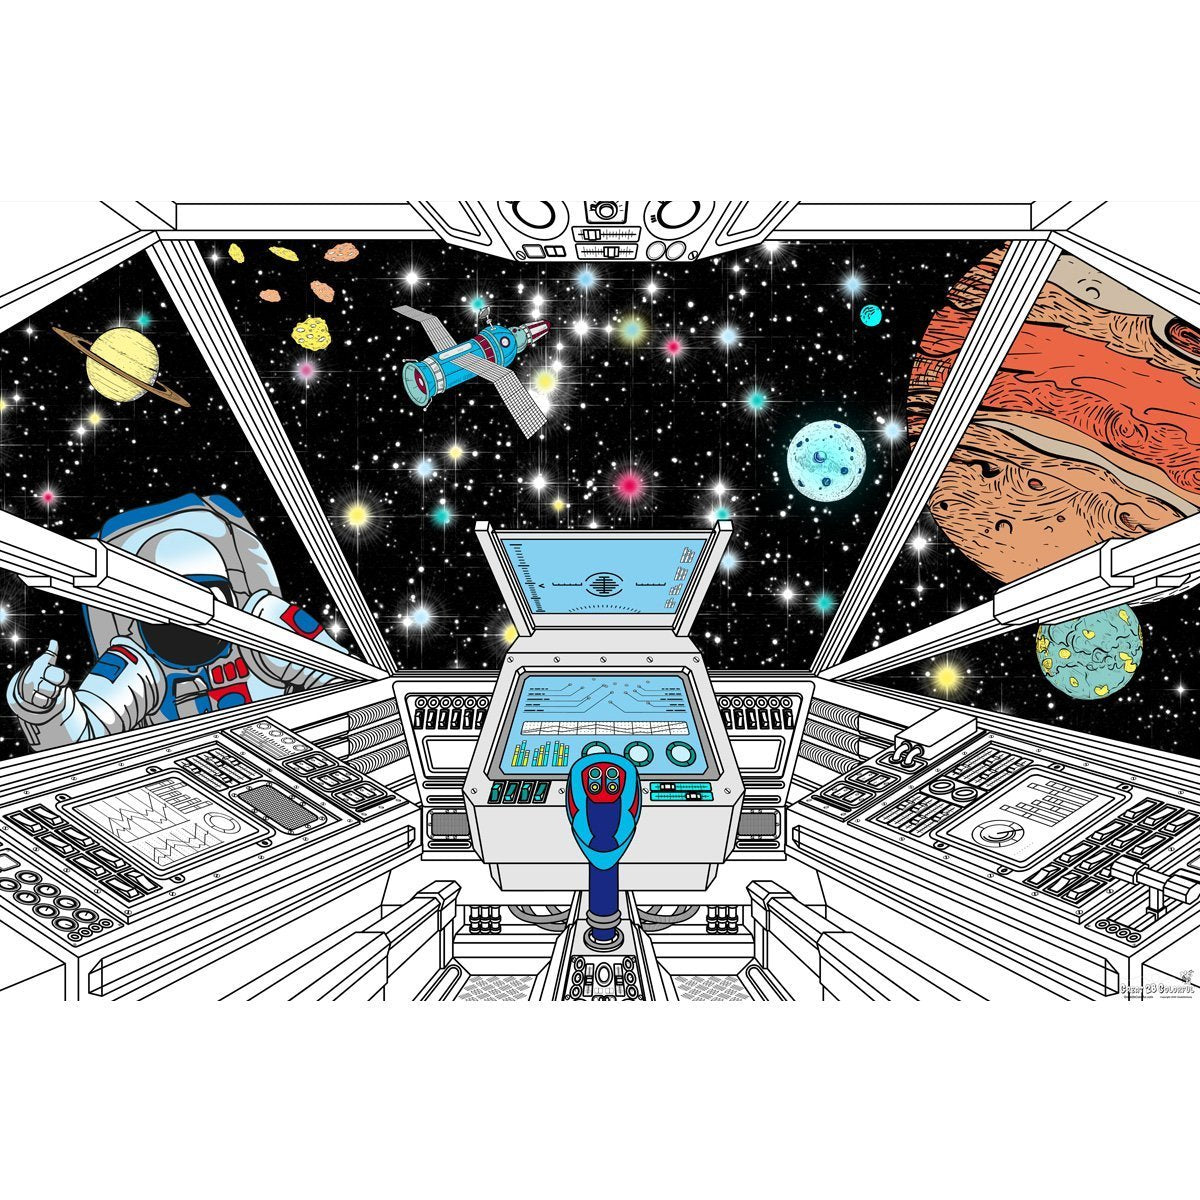 Great2bColorful Coloring Poster - Space Explorer